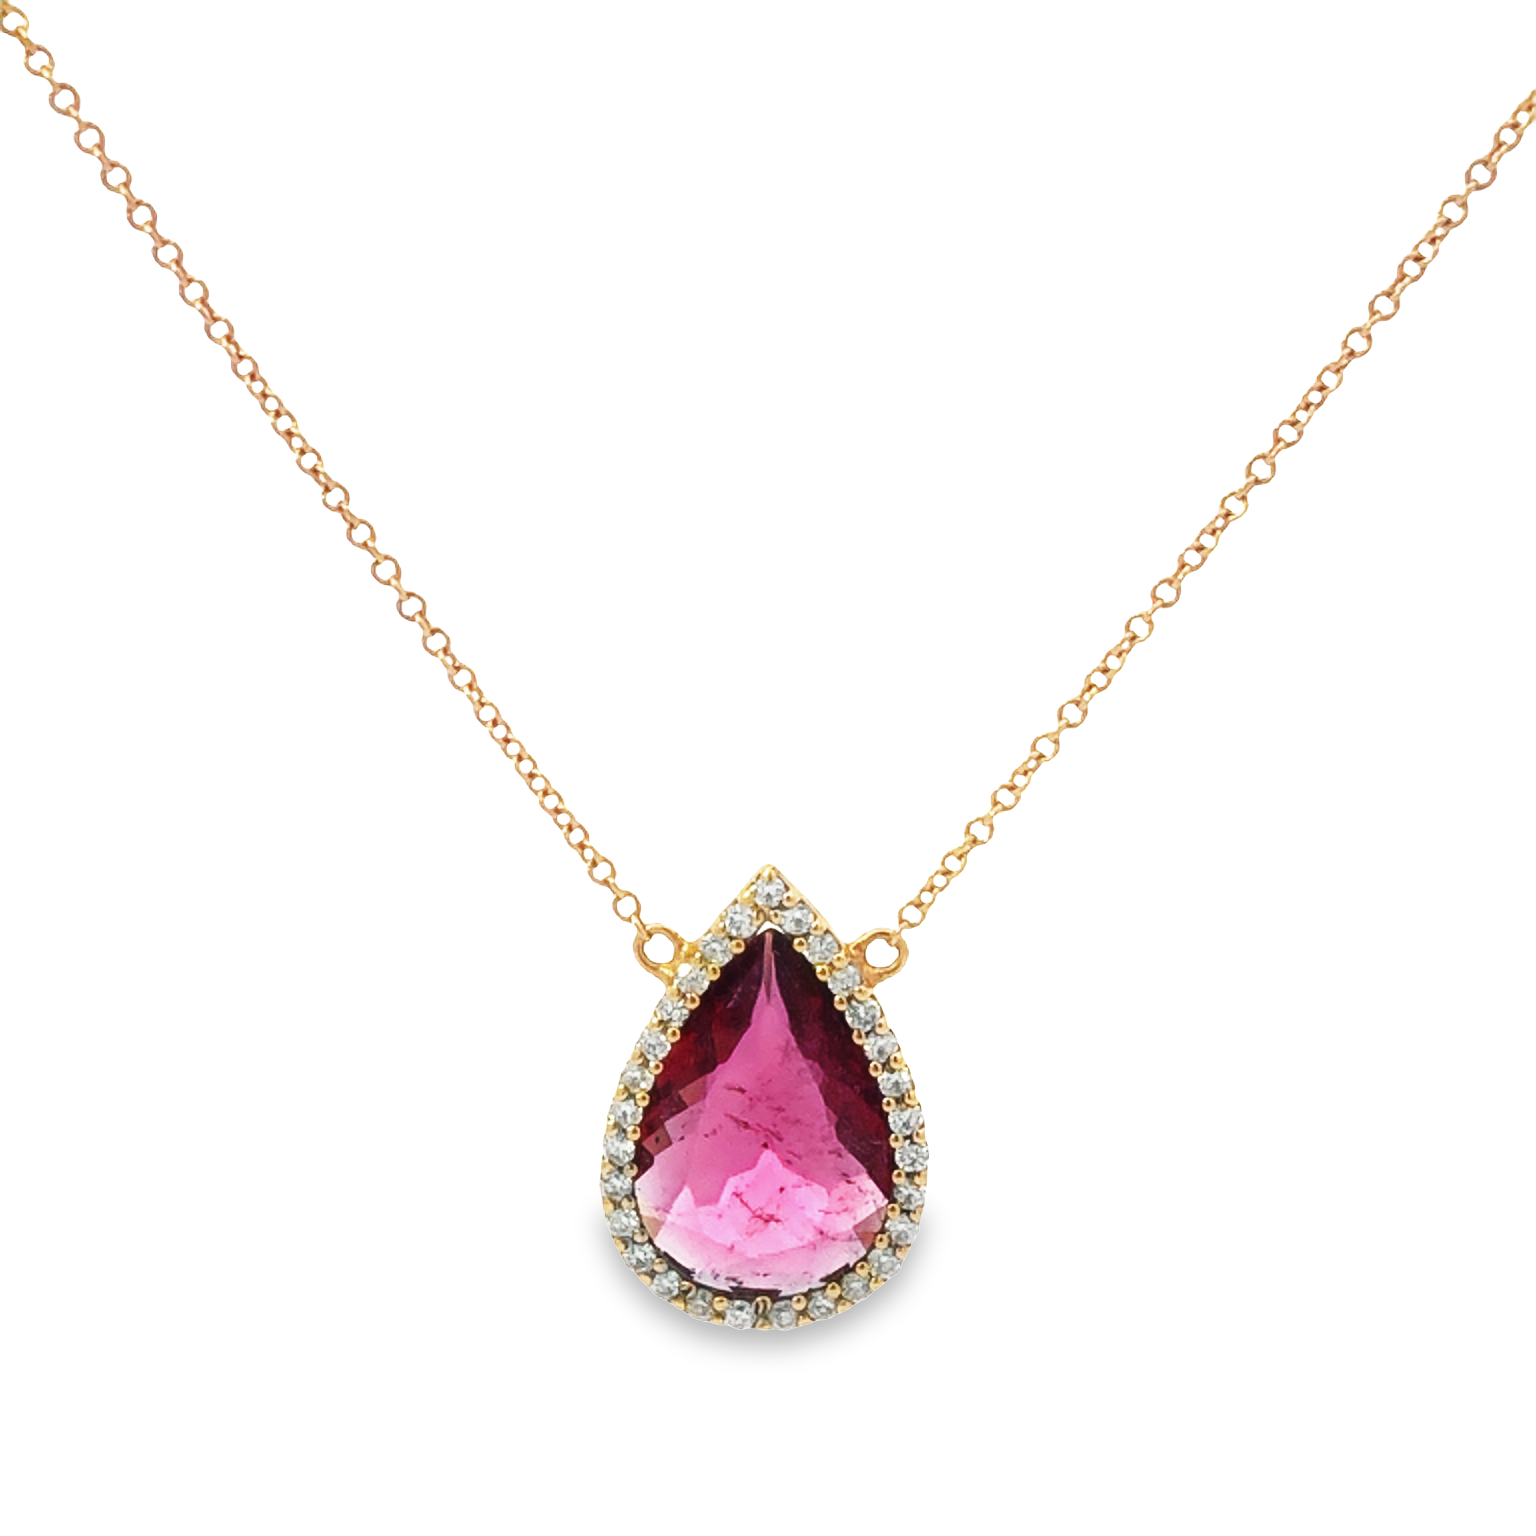 18K Rose Gold Rubellite and Diamond Necklace